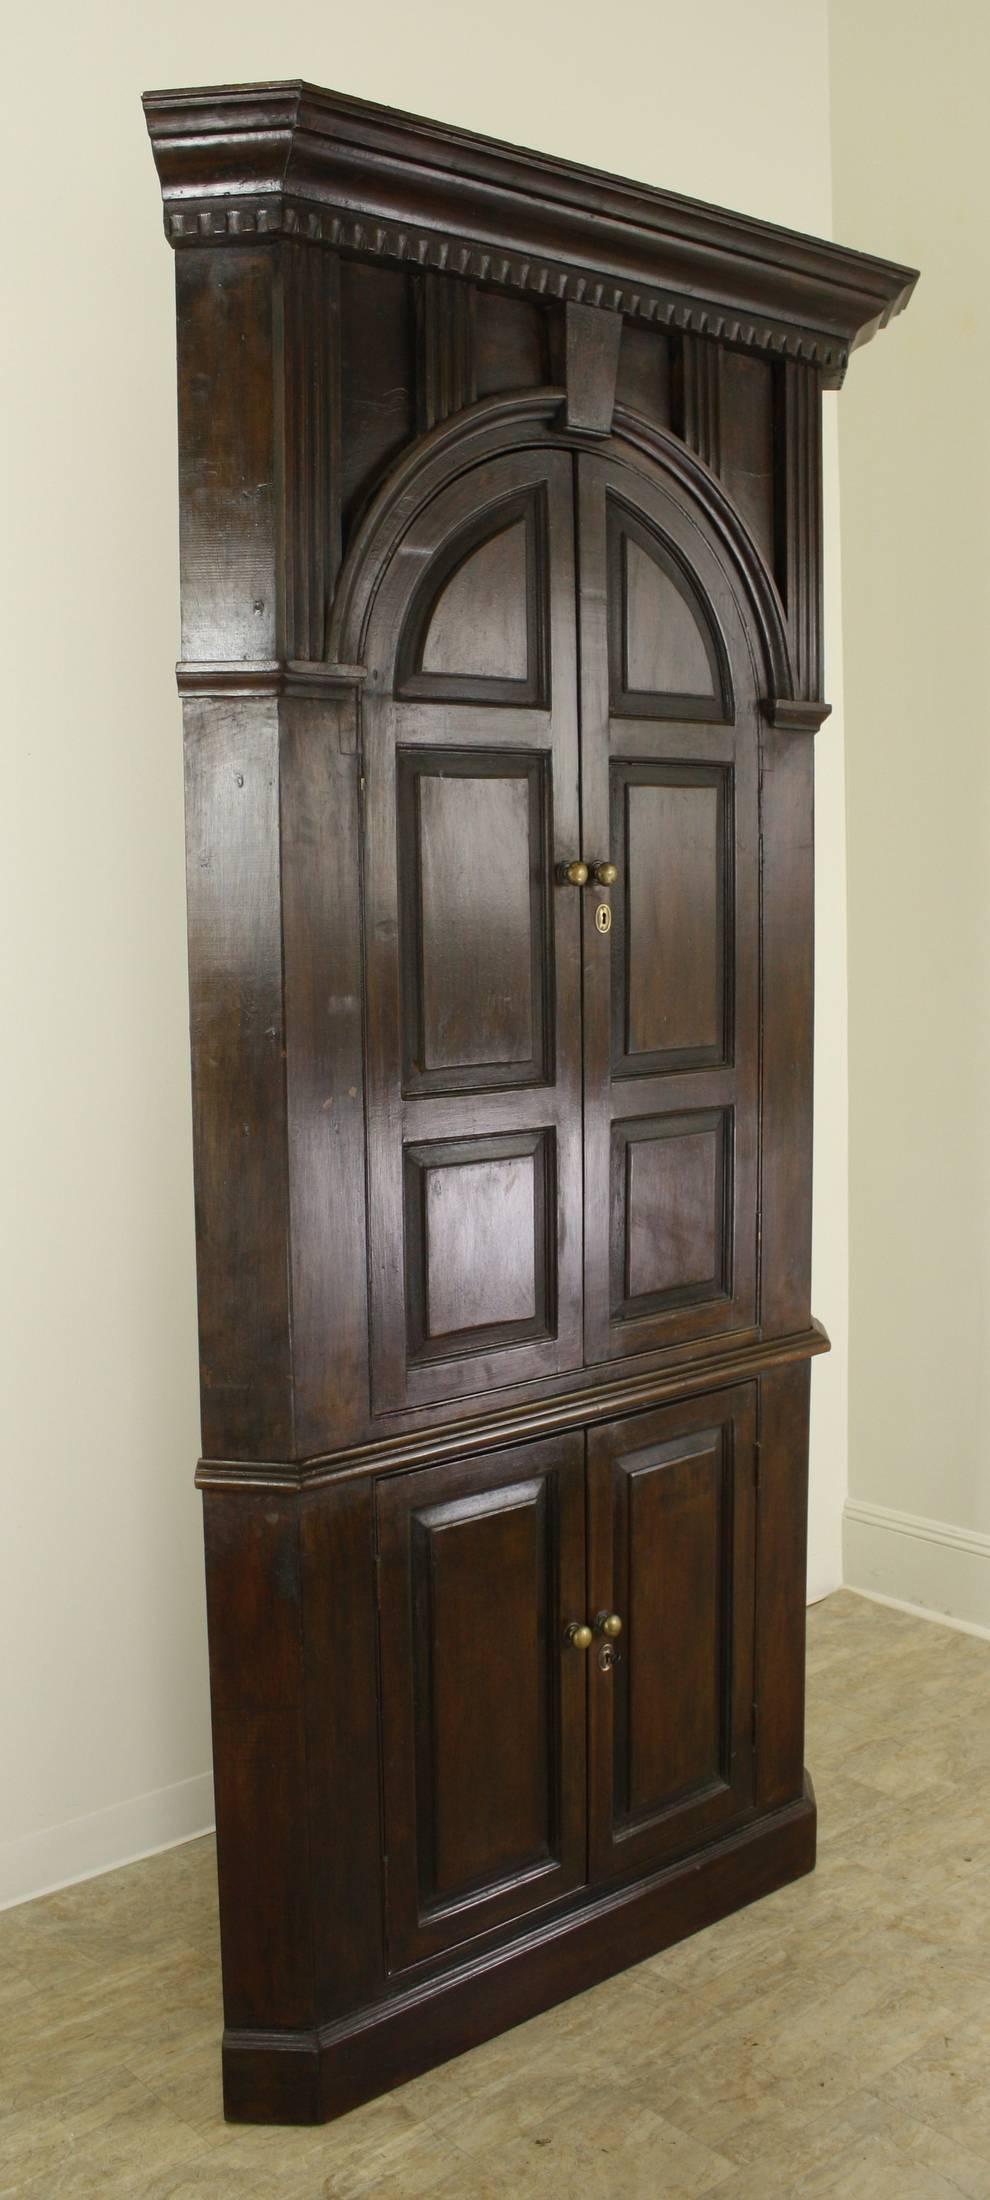 Beautifully proportioned handsome cupboard on cupboard. Graceful top moulding. Requires only about 30